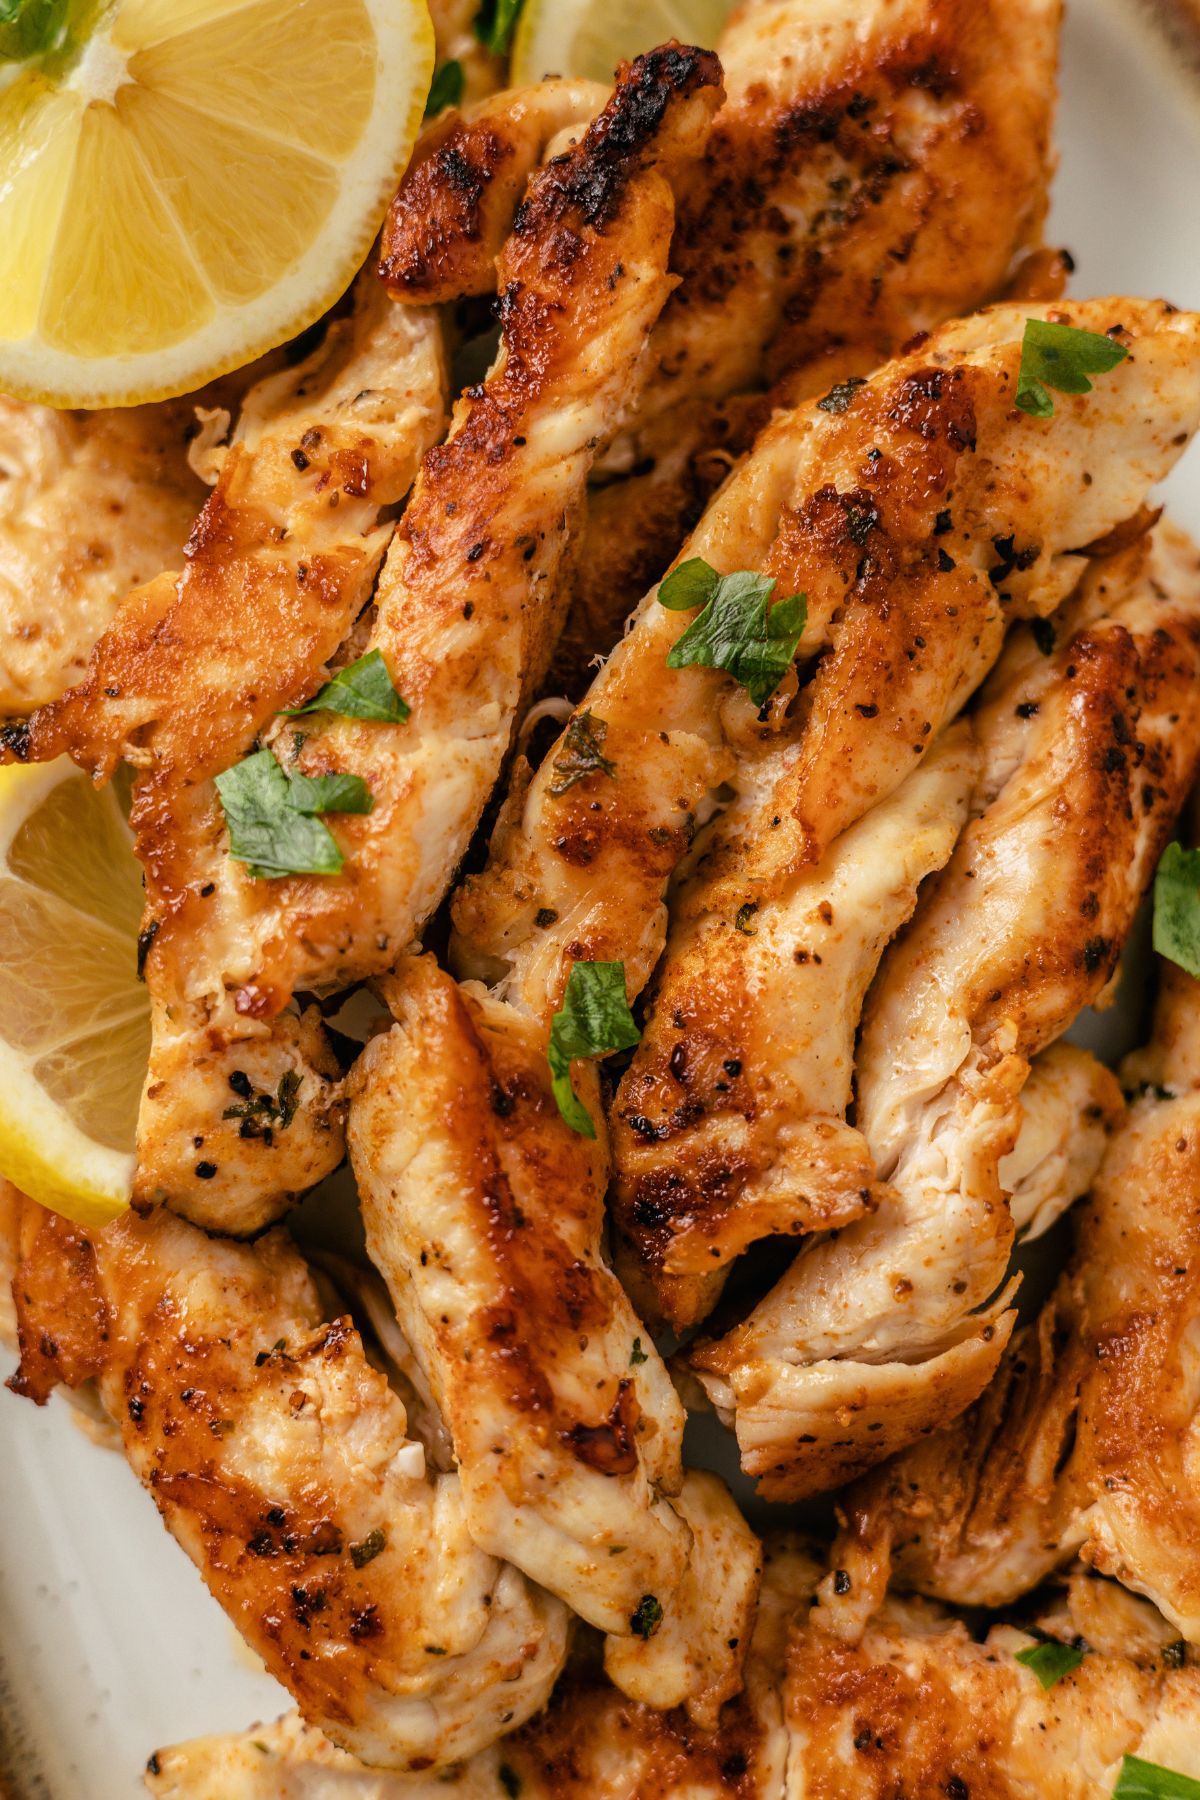 Pan-fried chicken tenders without breading, garnished with lemon slices.